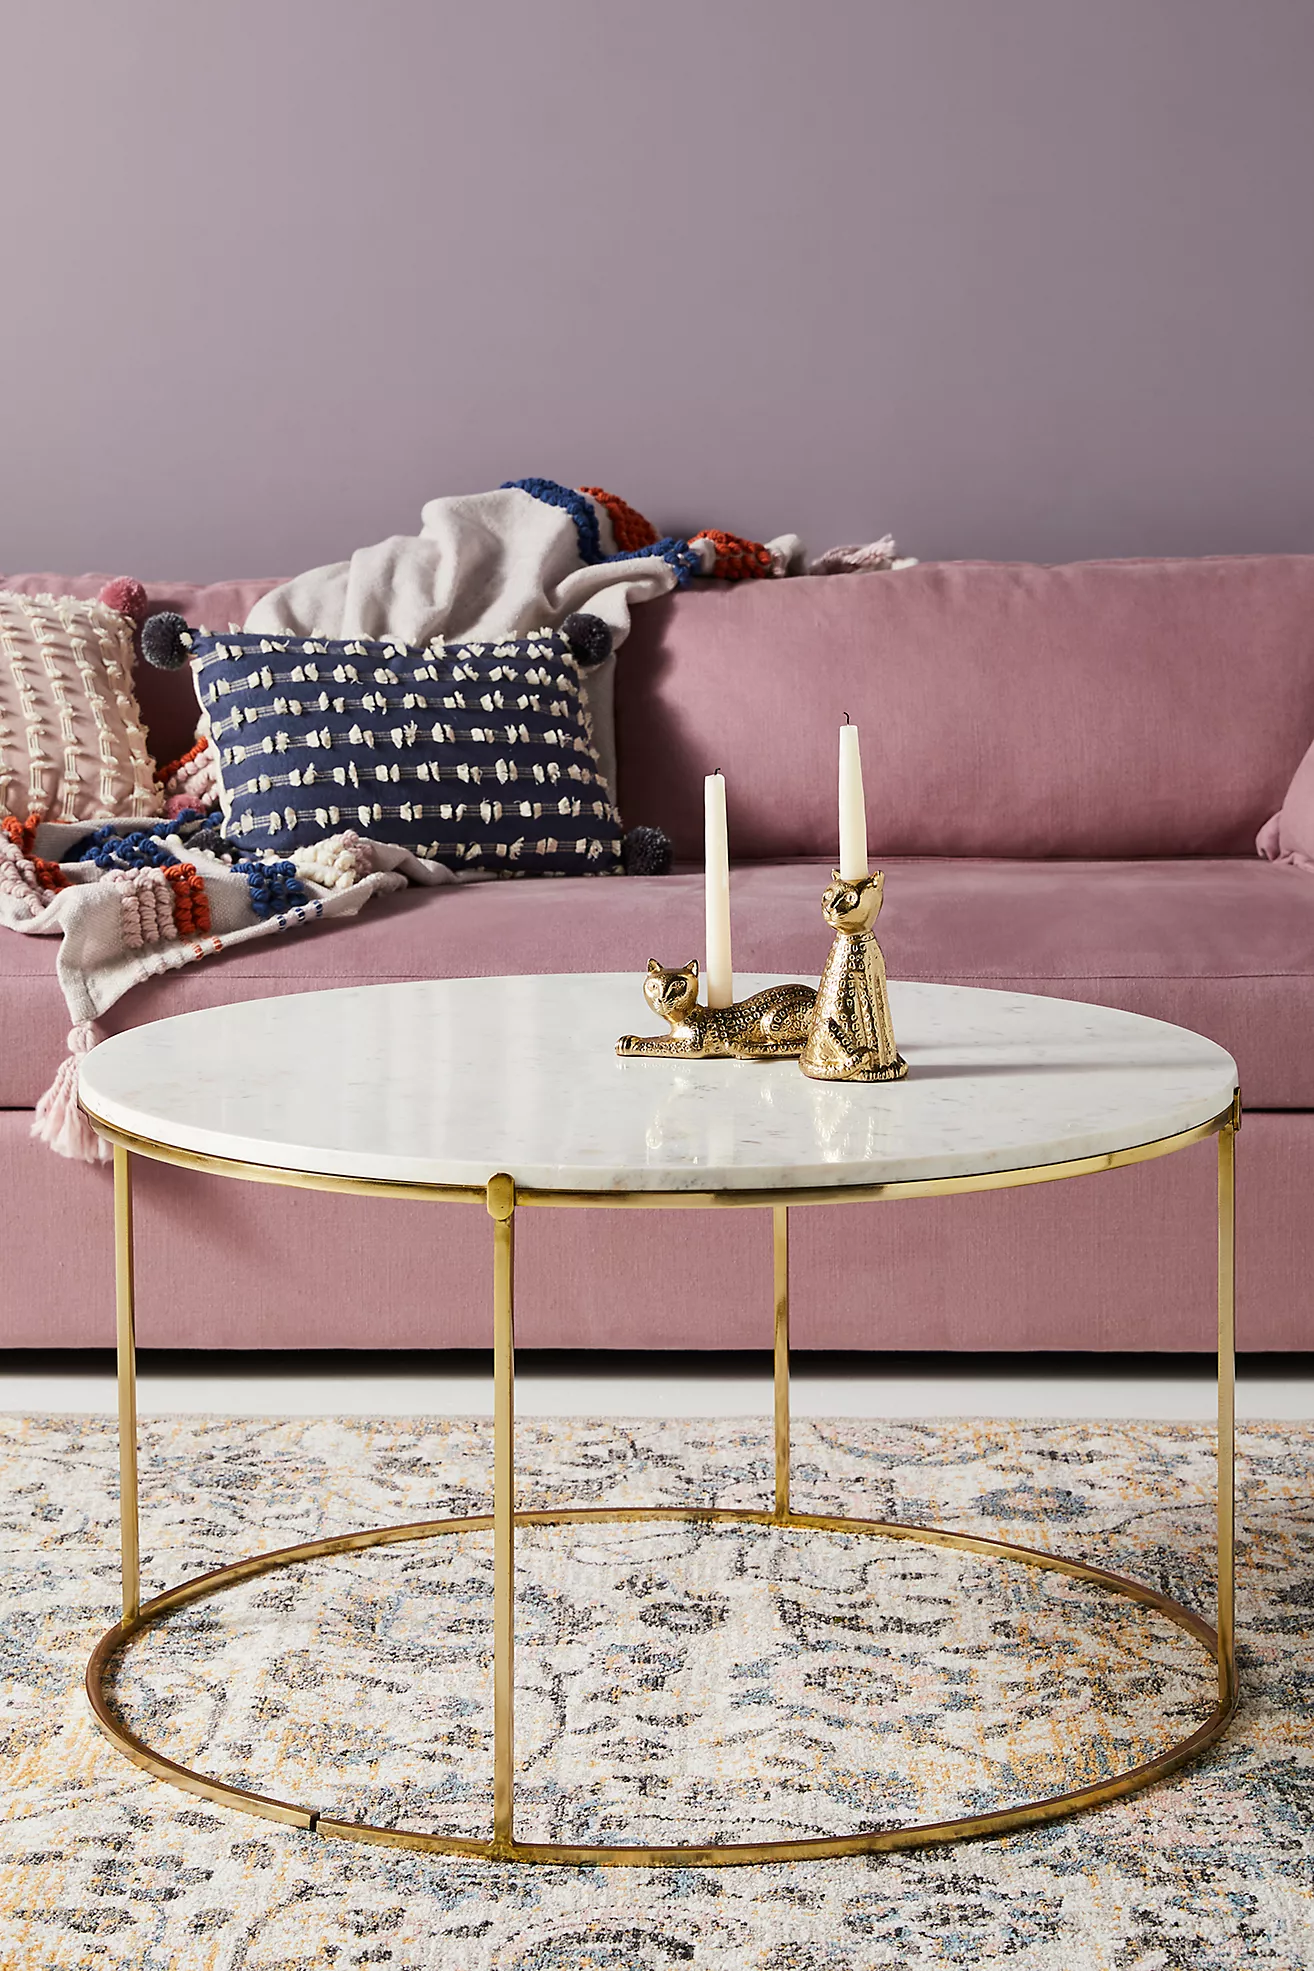 Opt for a Jewelry Inspired Table